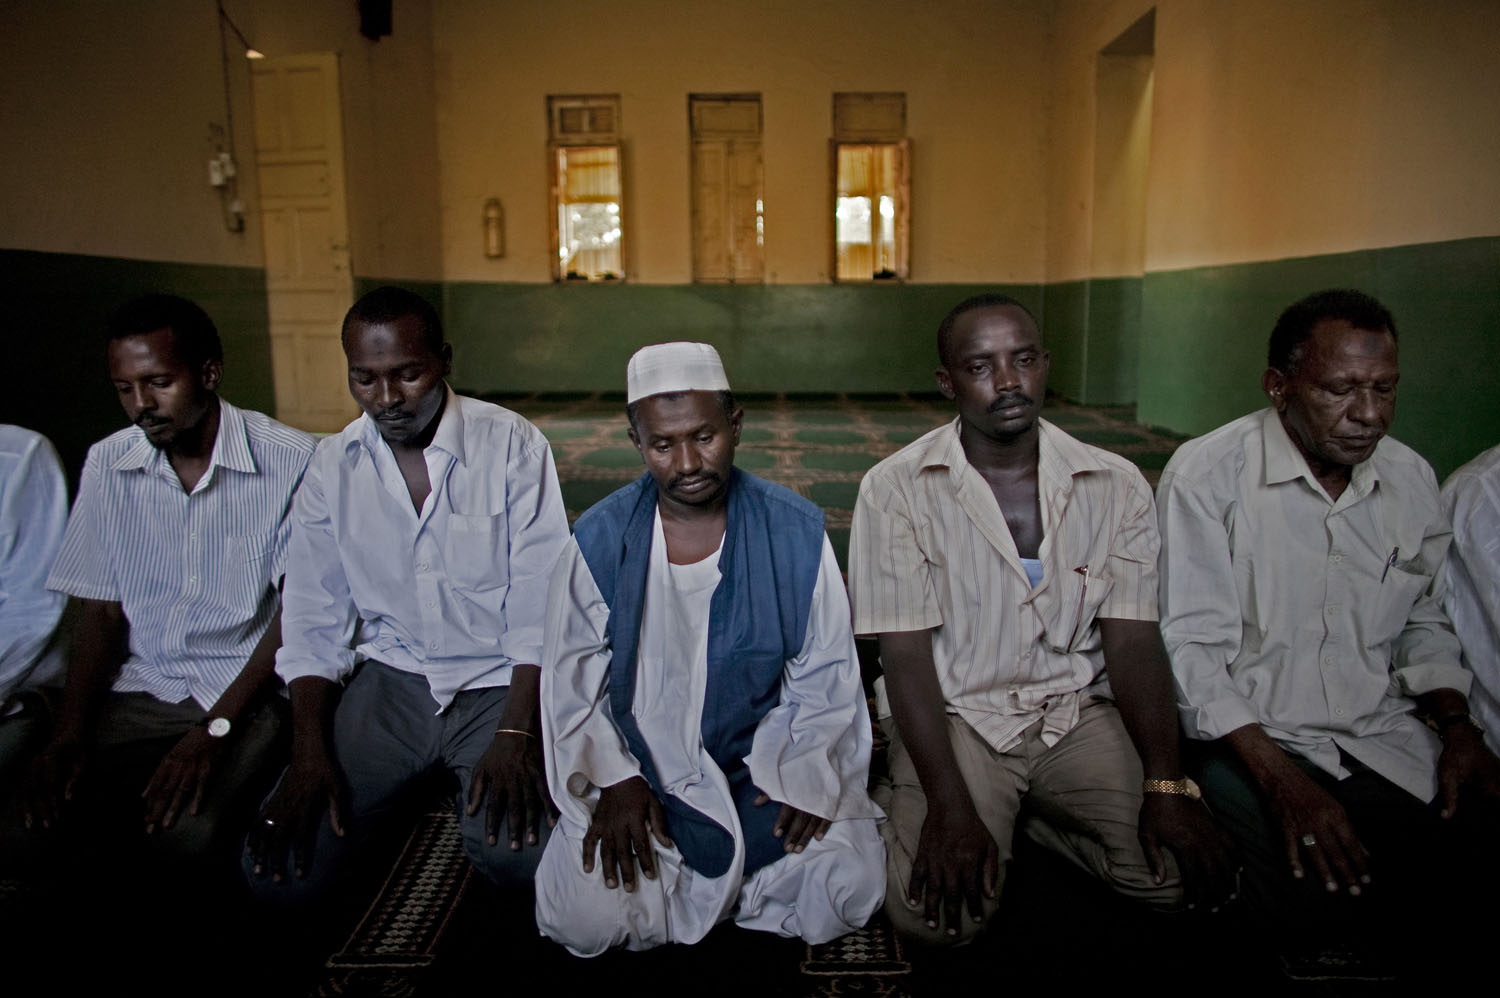 Northern Sudanese traders pray at a mosque in the volatile southern town of Malakal. Thousands of northerners live in the south where they own businesses and facilitate trade with the north. Such traders are the commercial lifeline between southern border towns that are cut off from Juba and therefore dependent on goods from the north.